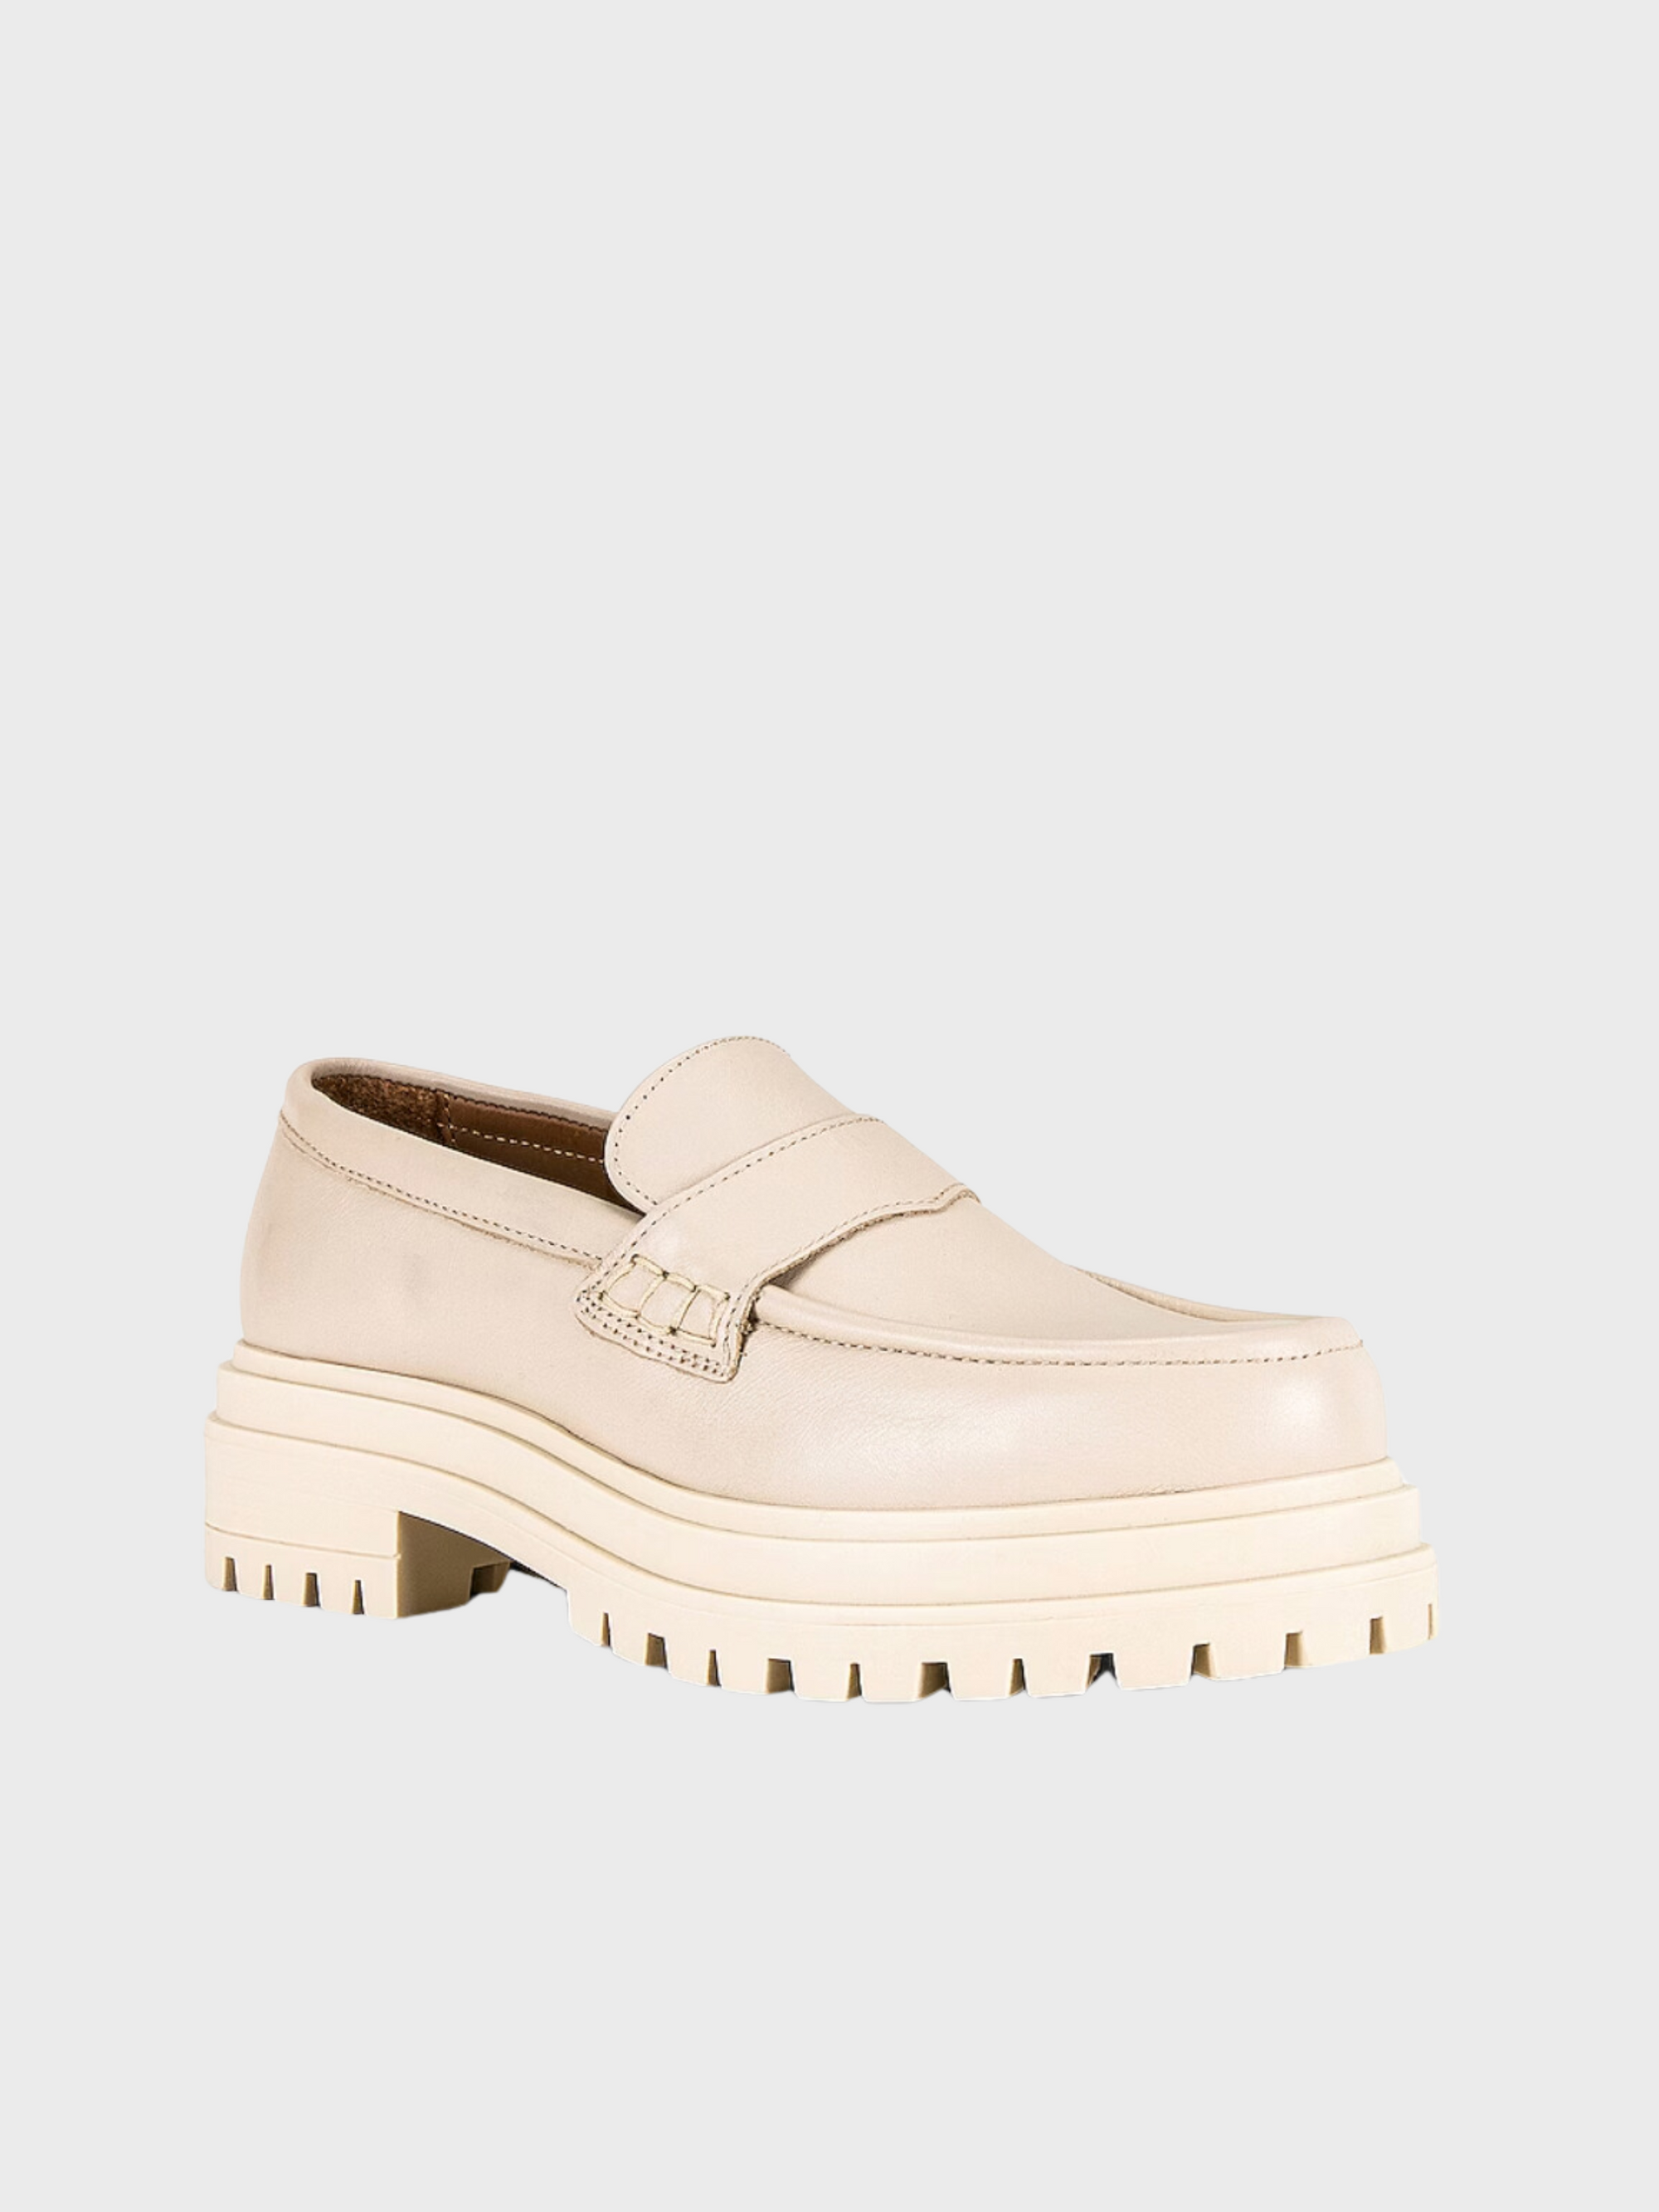 ALOHAS Obsidian Cream Leather Loafers-Shoes-West of Woodward Boutique-Vancouver-Canada